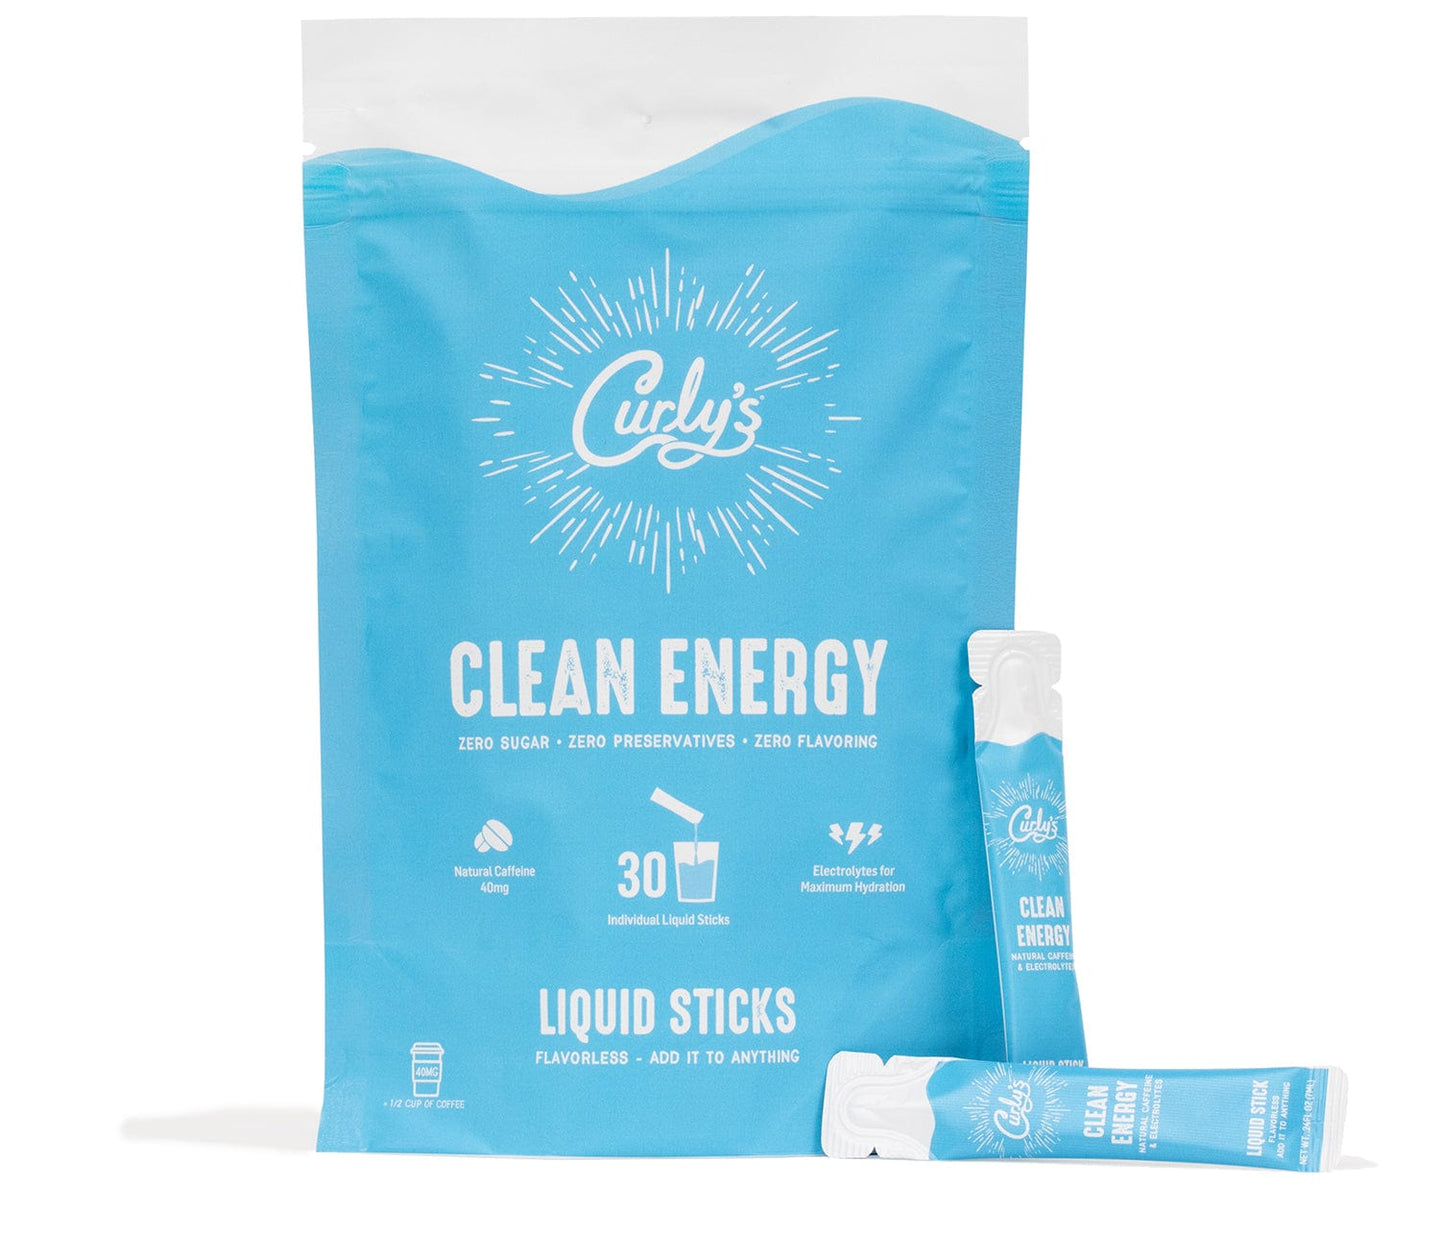 Curly's Beverage Company Curly's Clean Energy Liquid Sticks